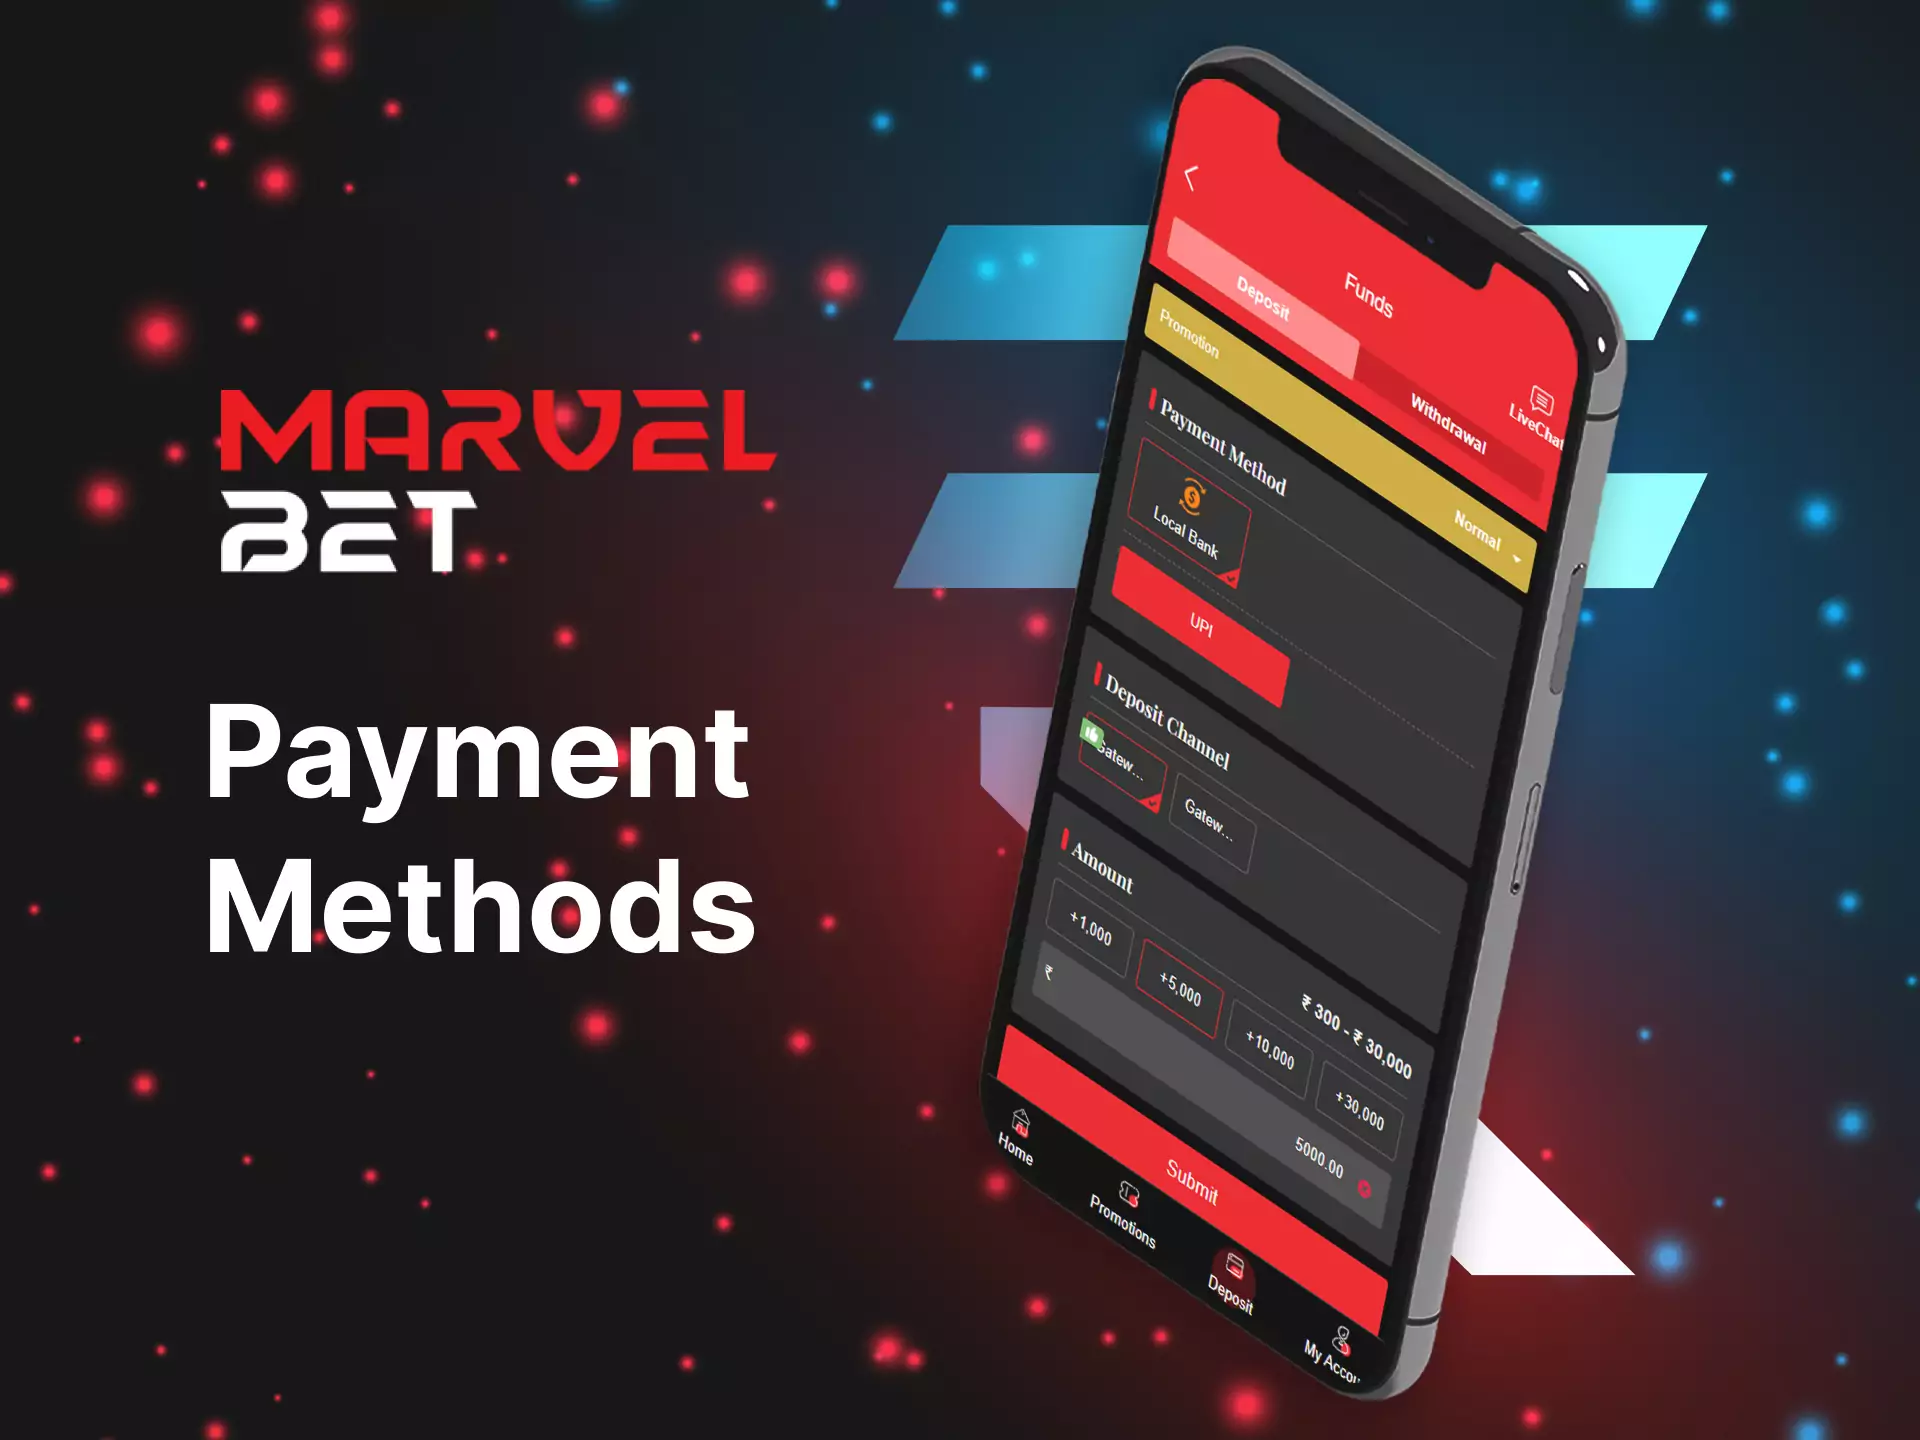 In the Marvelbet app, you can deposit and withdraw money in INR.